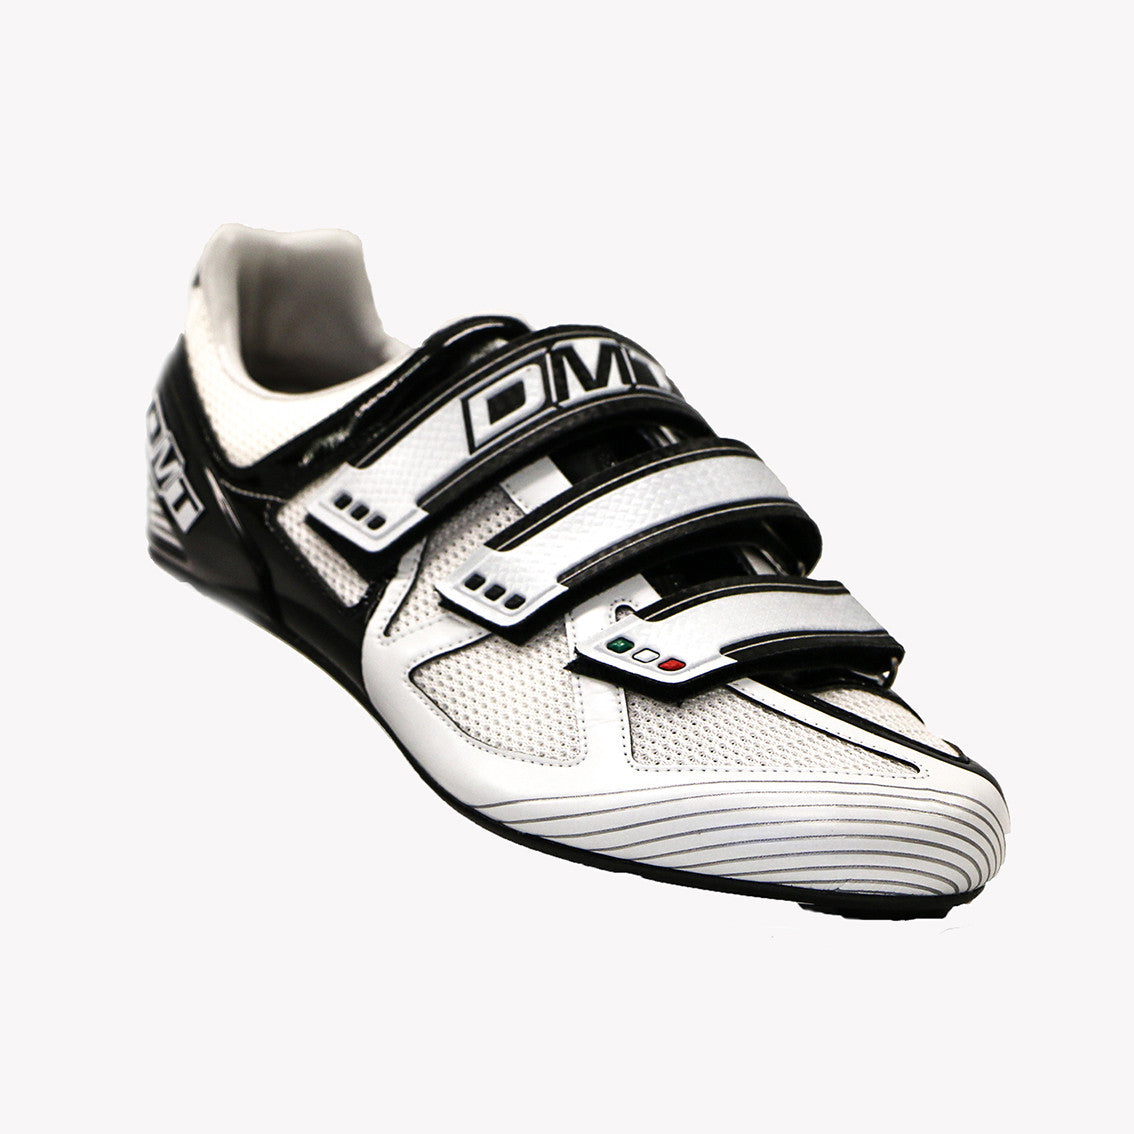 speedplay cycling shoes